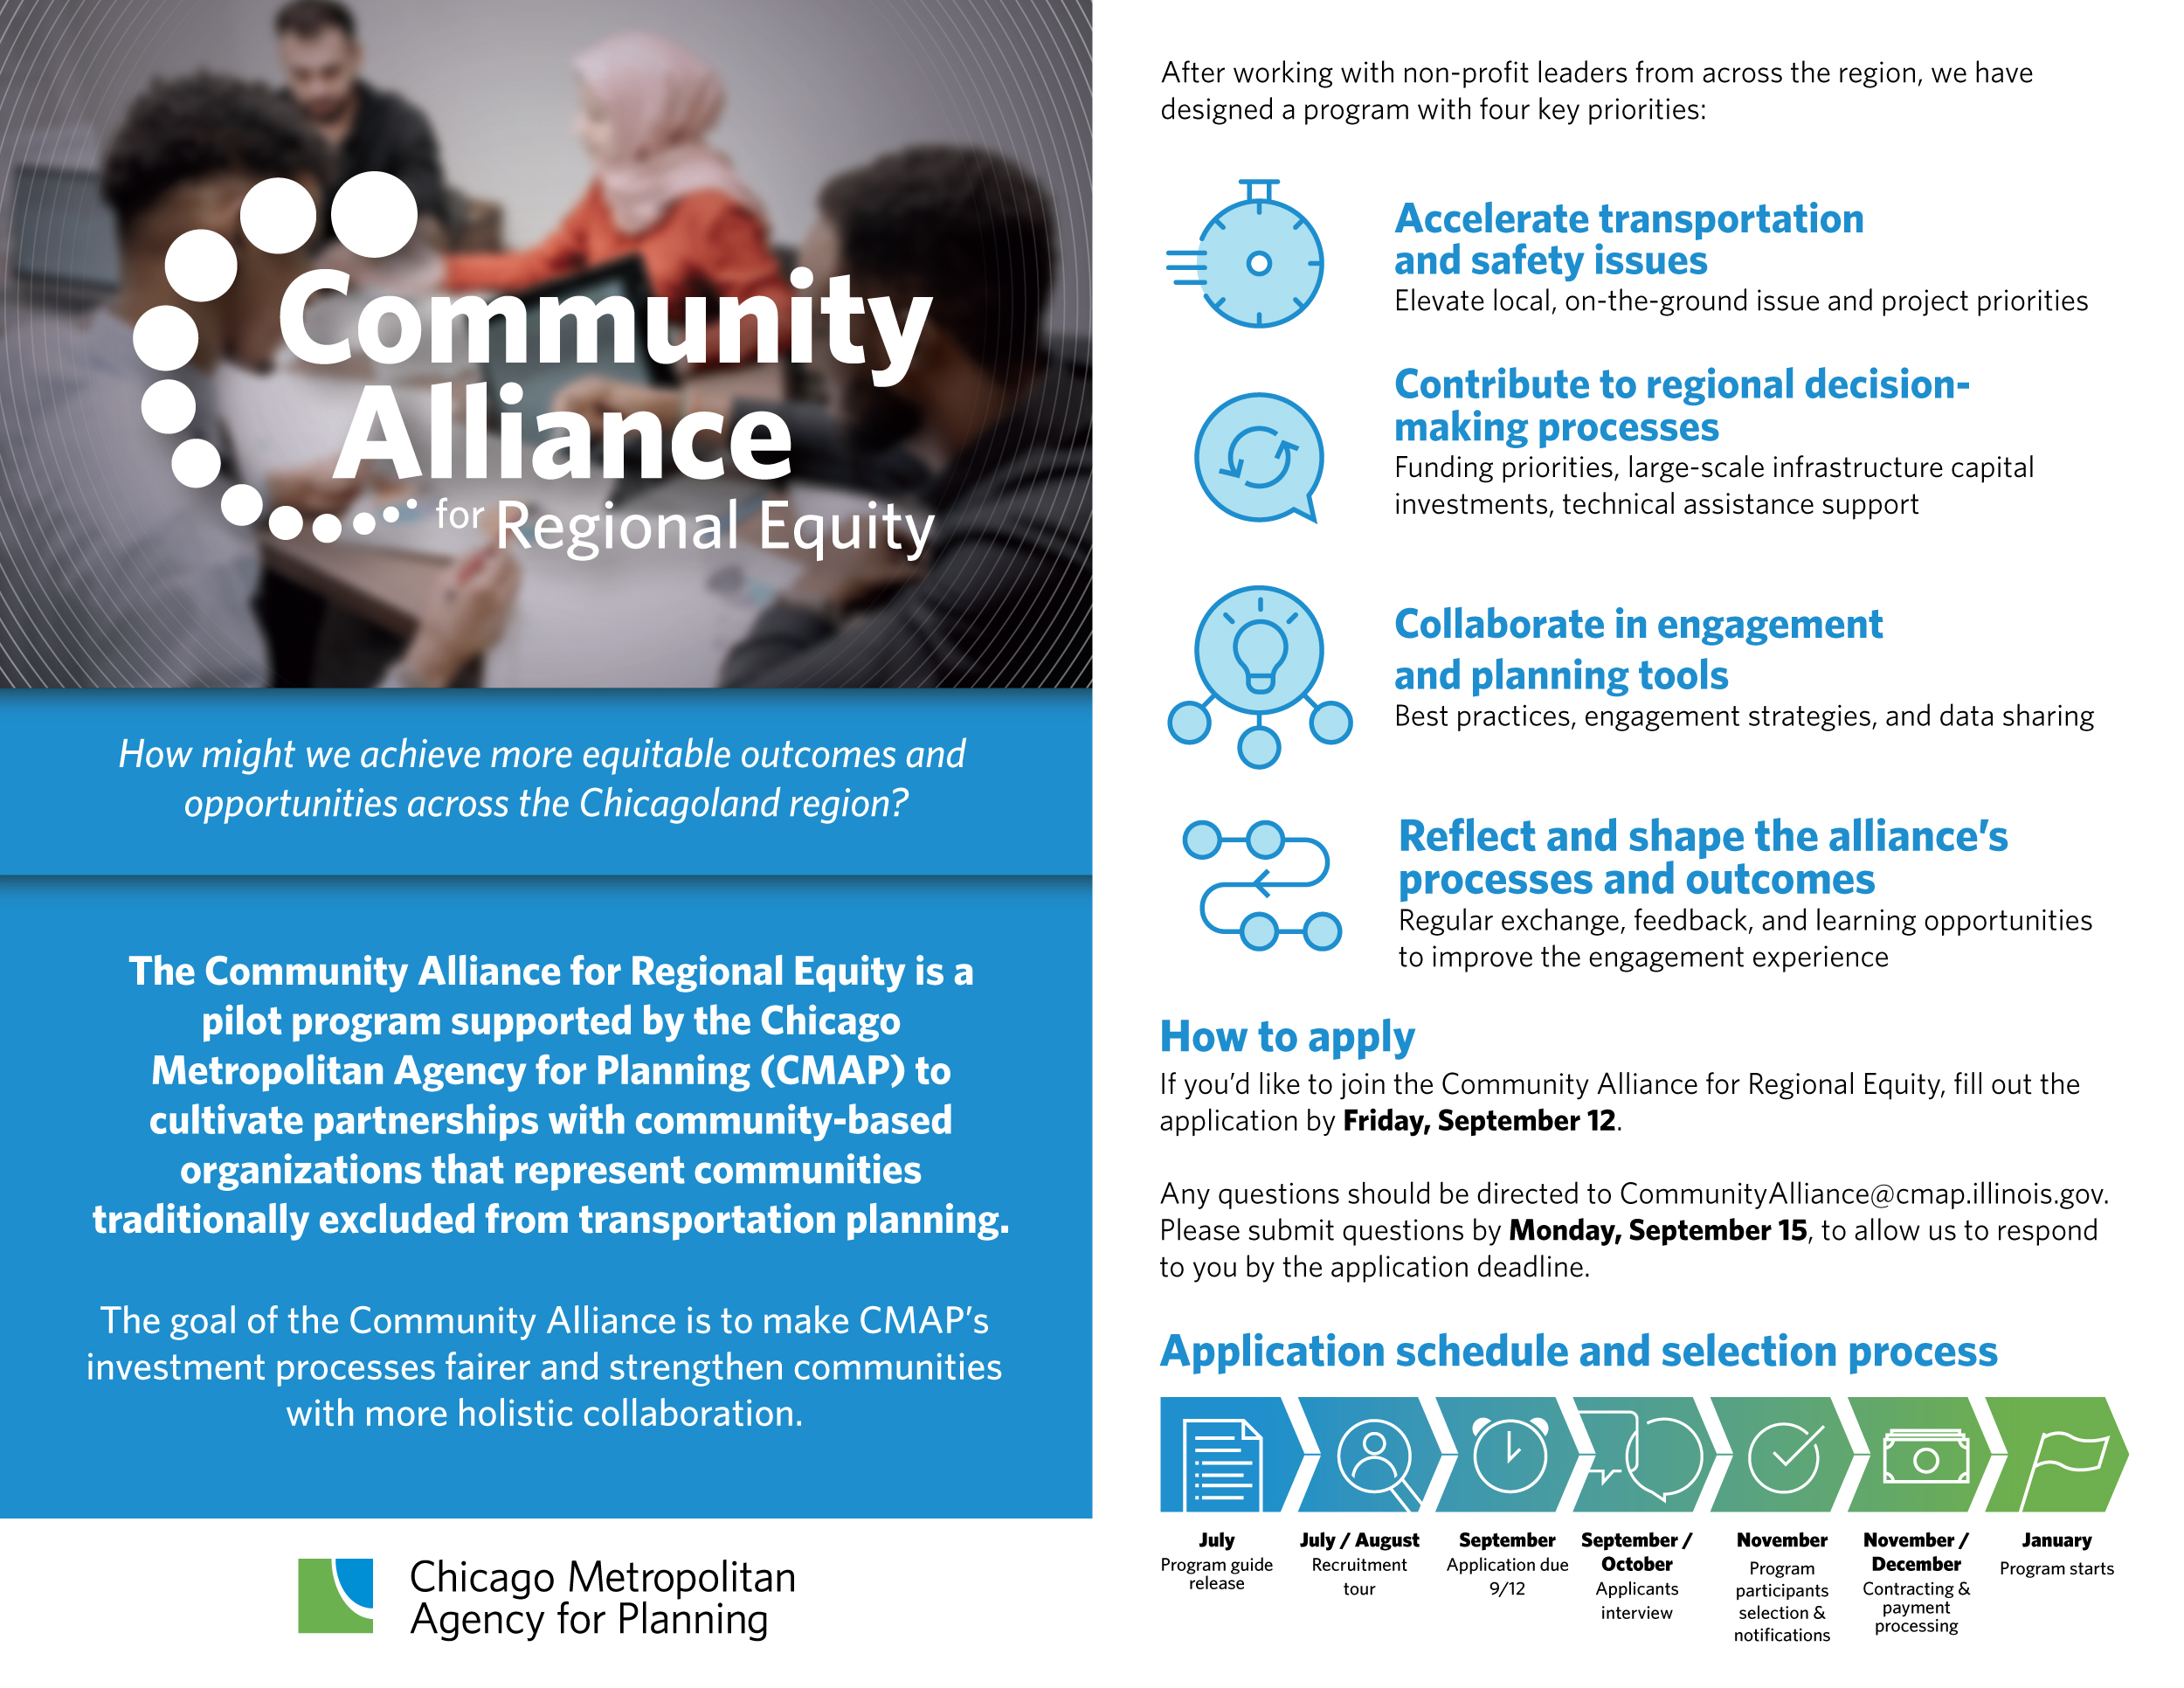 Community Alliance one-pager